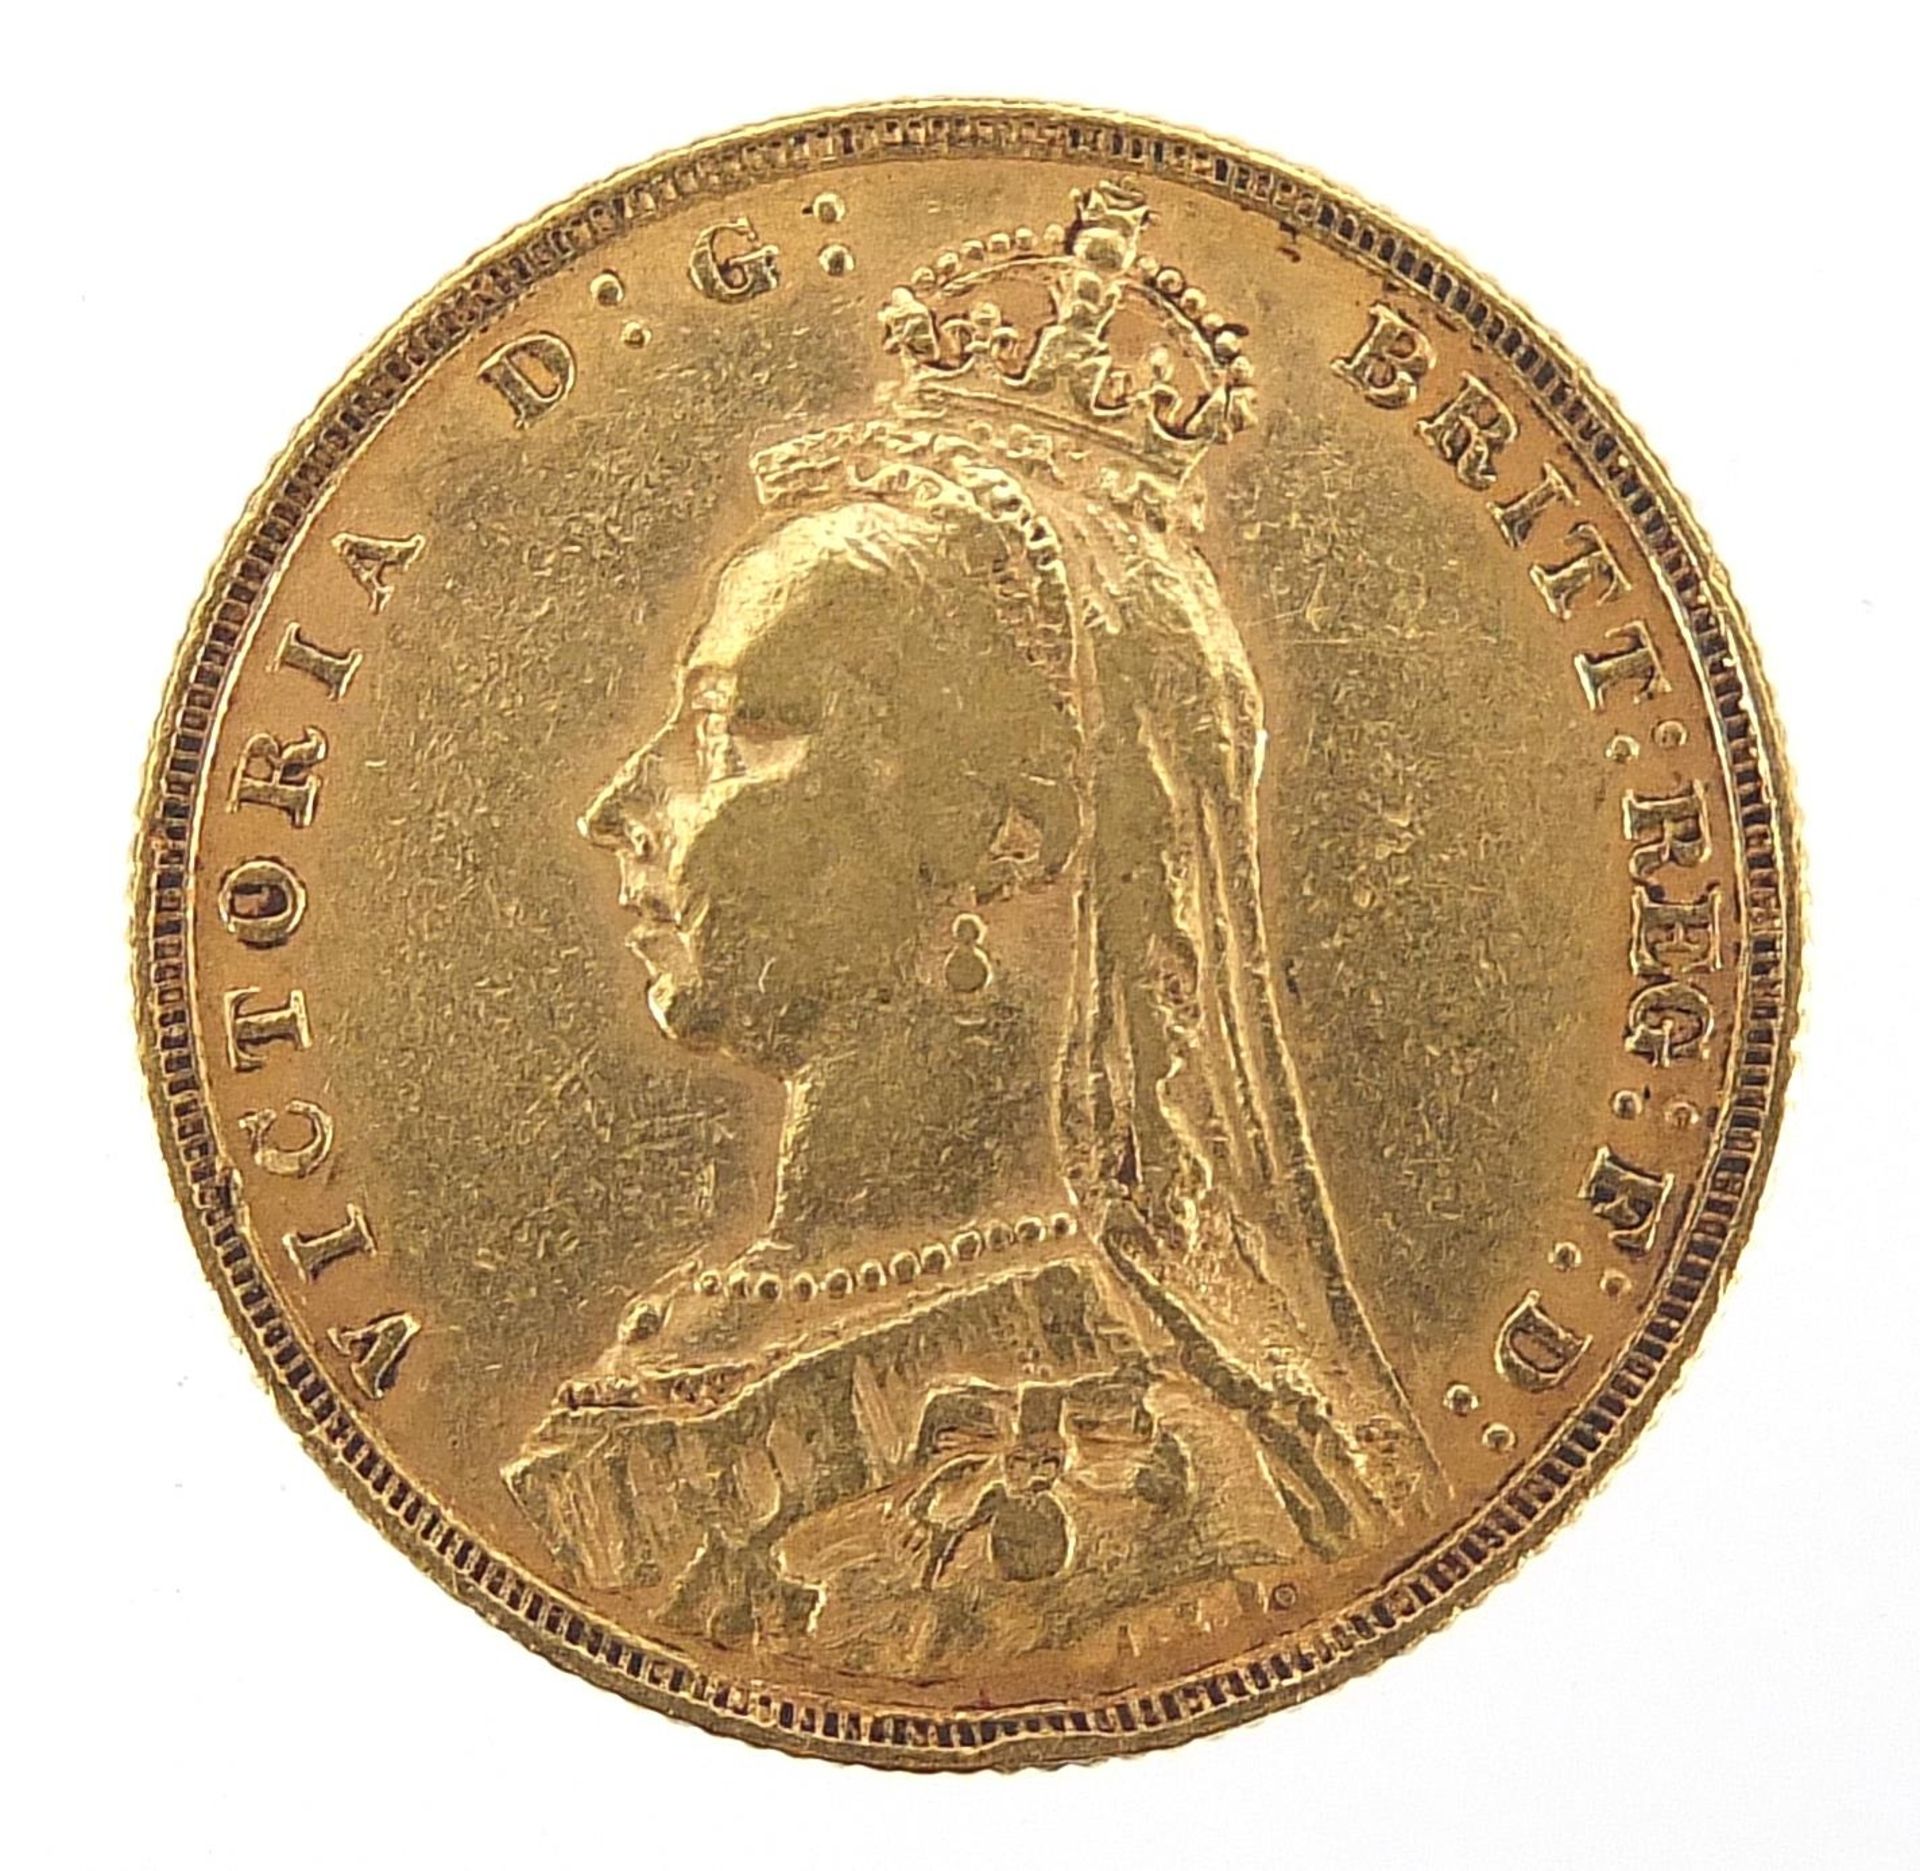 Queen Victoria Jubilee head 1892 gold sovereign - this lot is sold without buyer's premium - Image 2 of 3